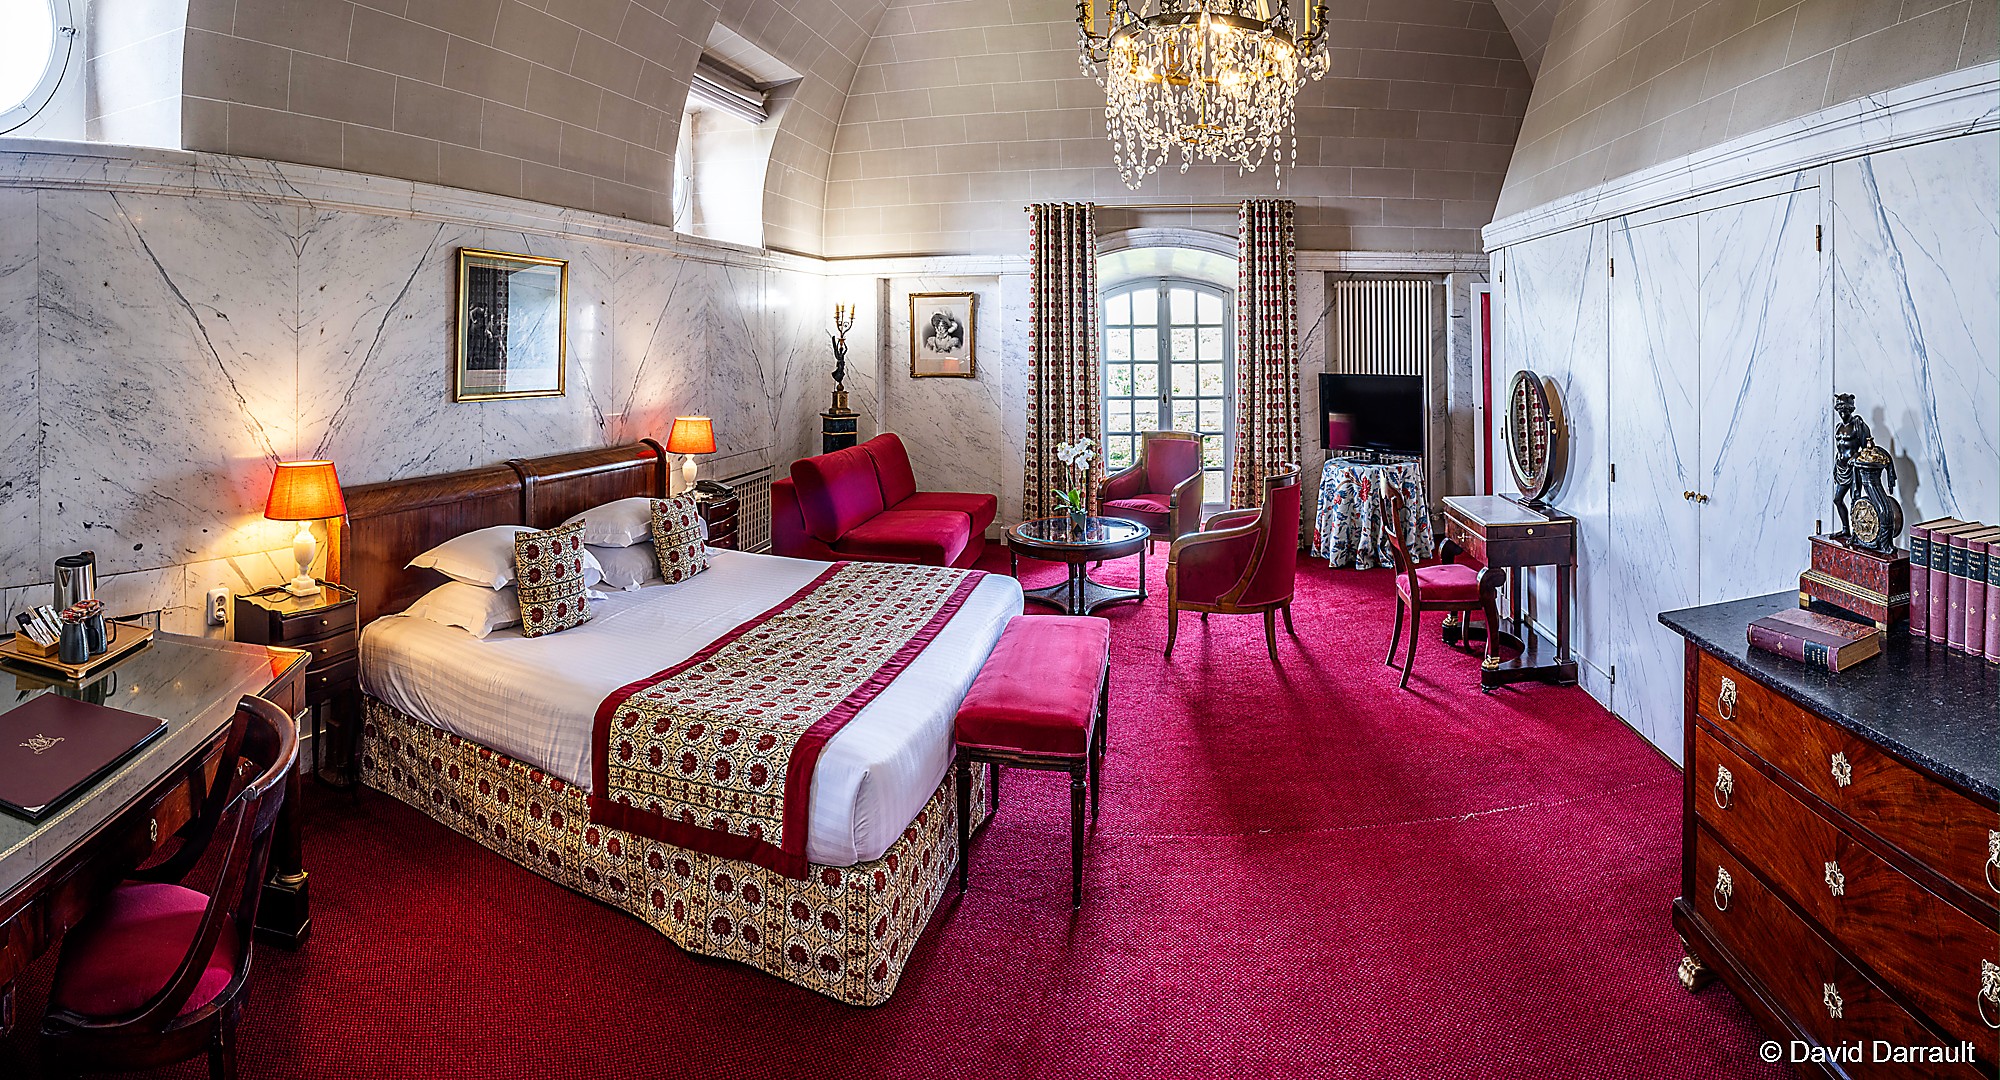 Chateau hotel spa and restaurant in Loire valley